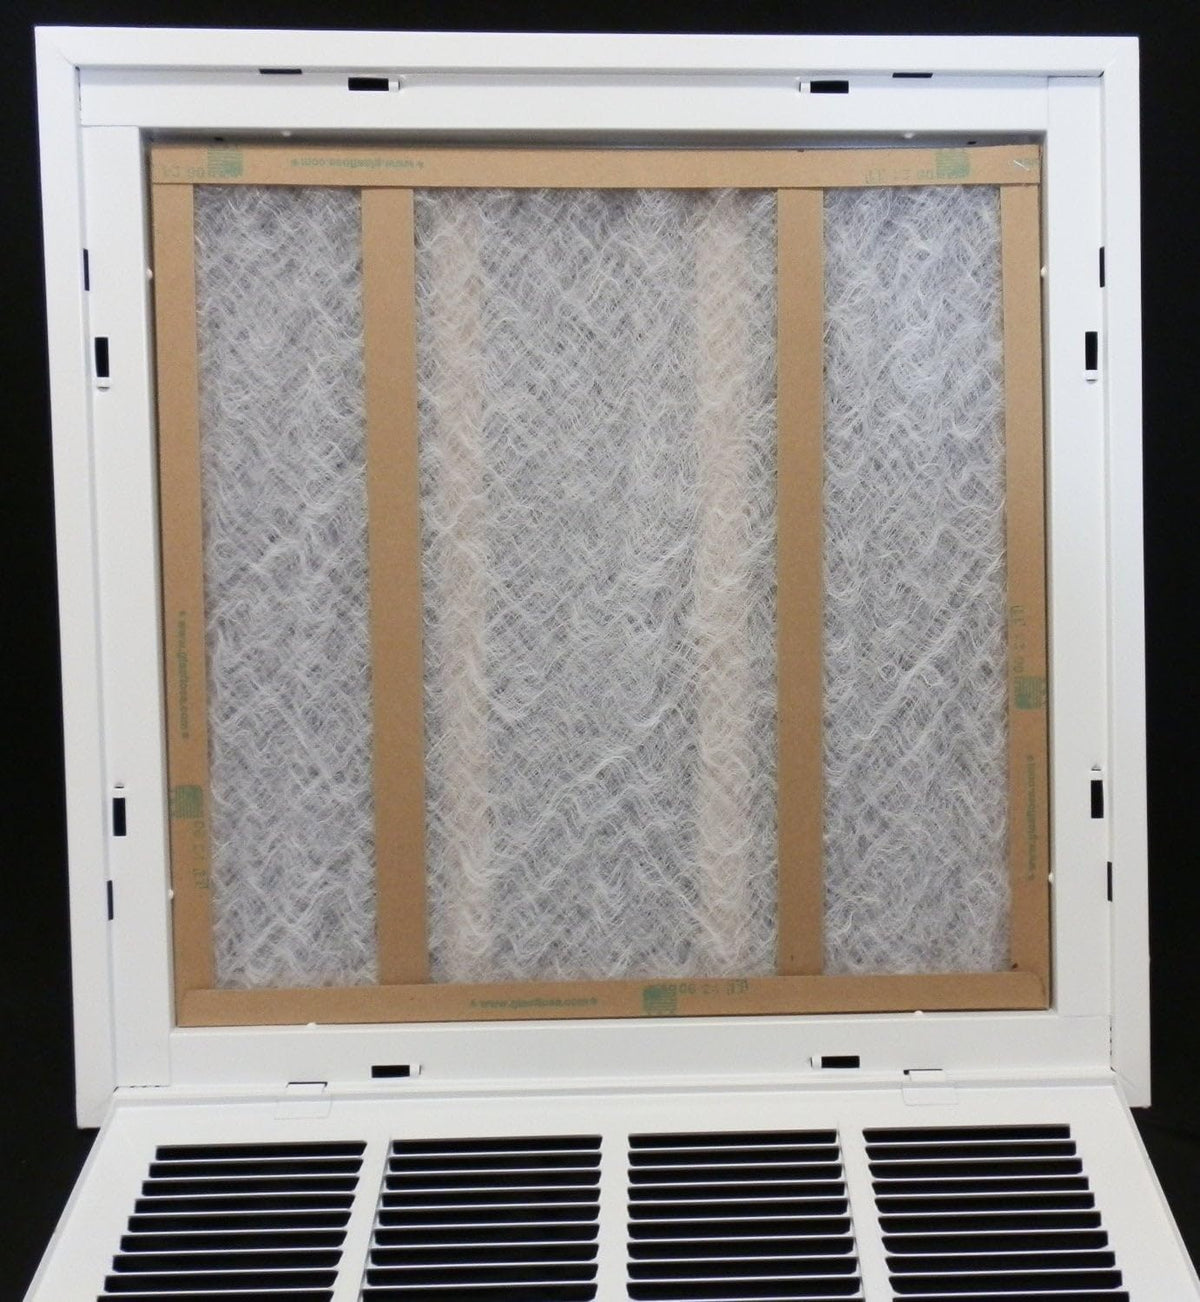 34&quot; X 12&quot; Steel Return Air Filter Grille for 1&quot; Filter - Removable Frame - [Outer Dimensions: 36 5/8&quot; X 14 5/8&quot;]